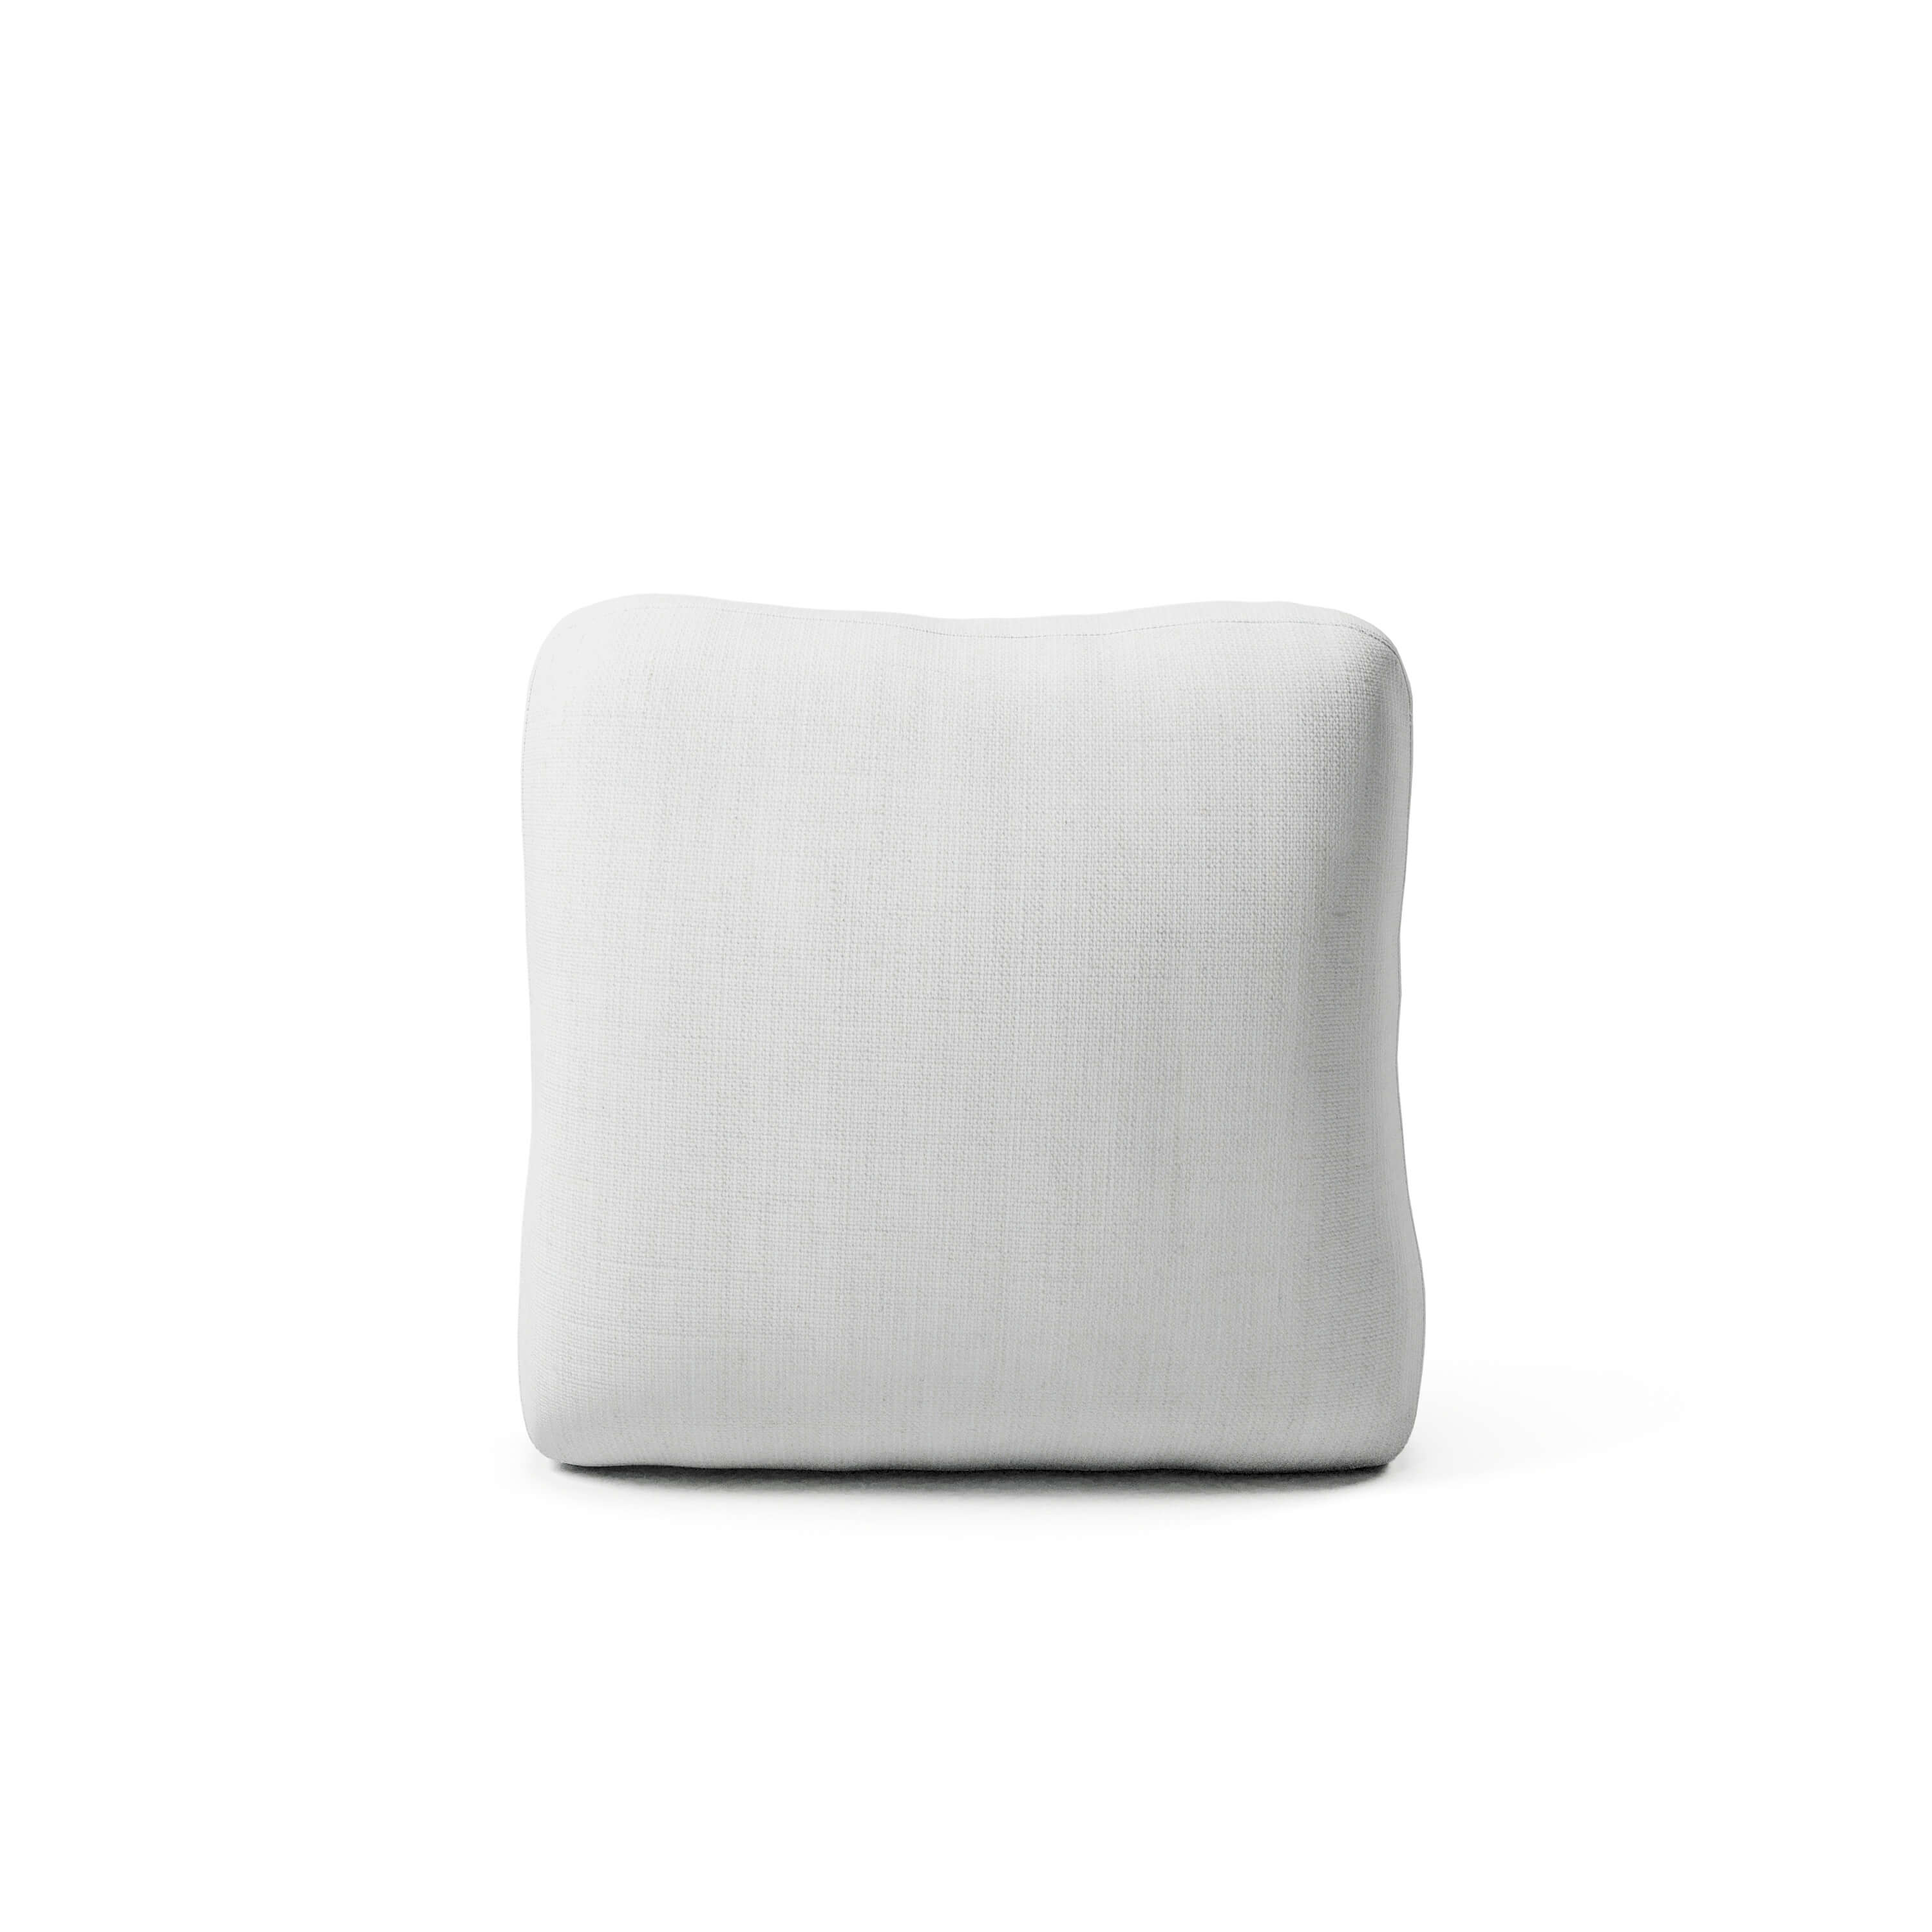 Comfy Sofa - Square Cushion Slipcover Replacement